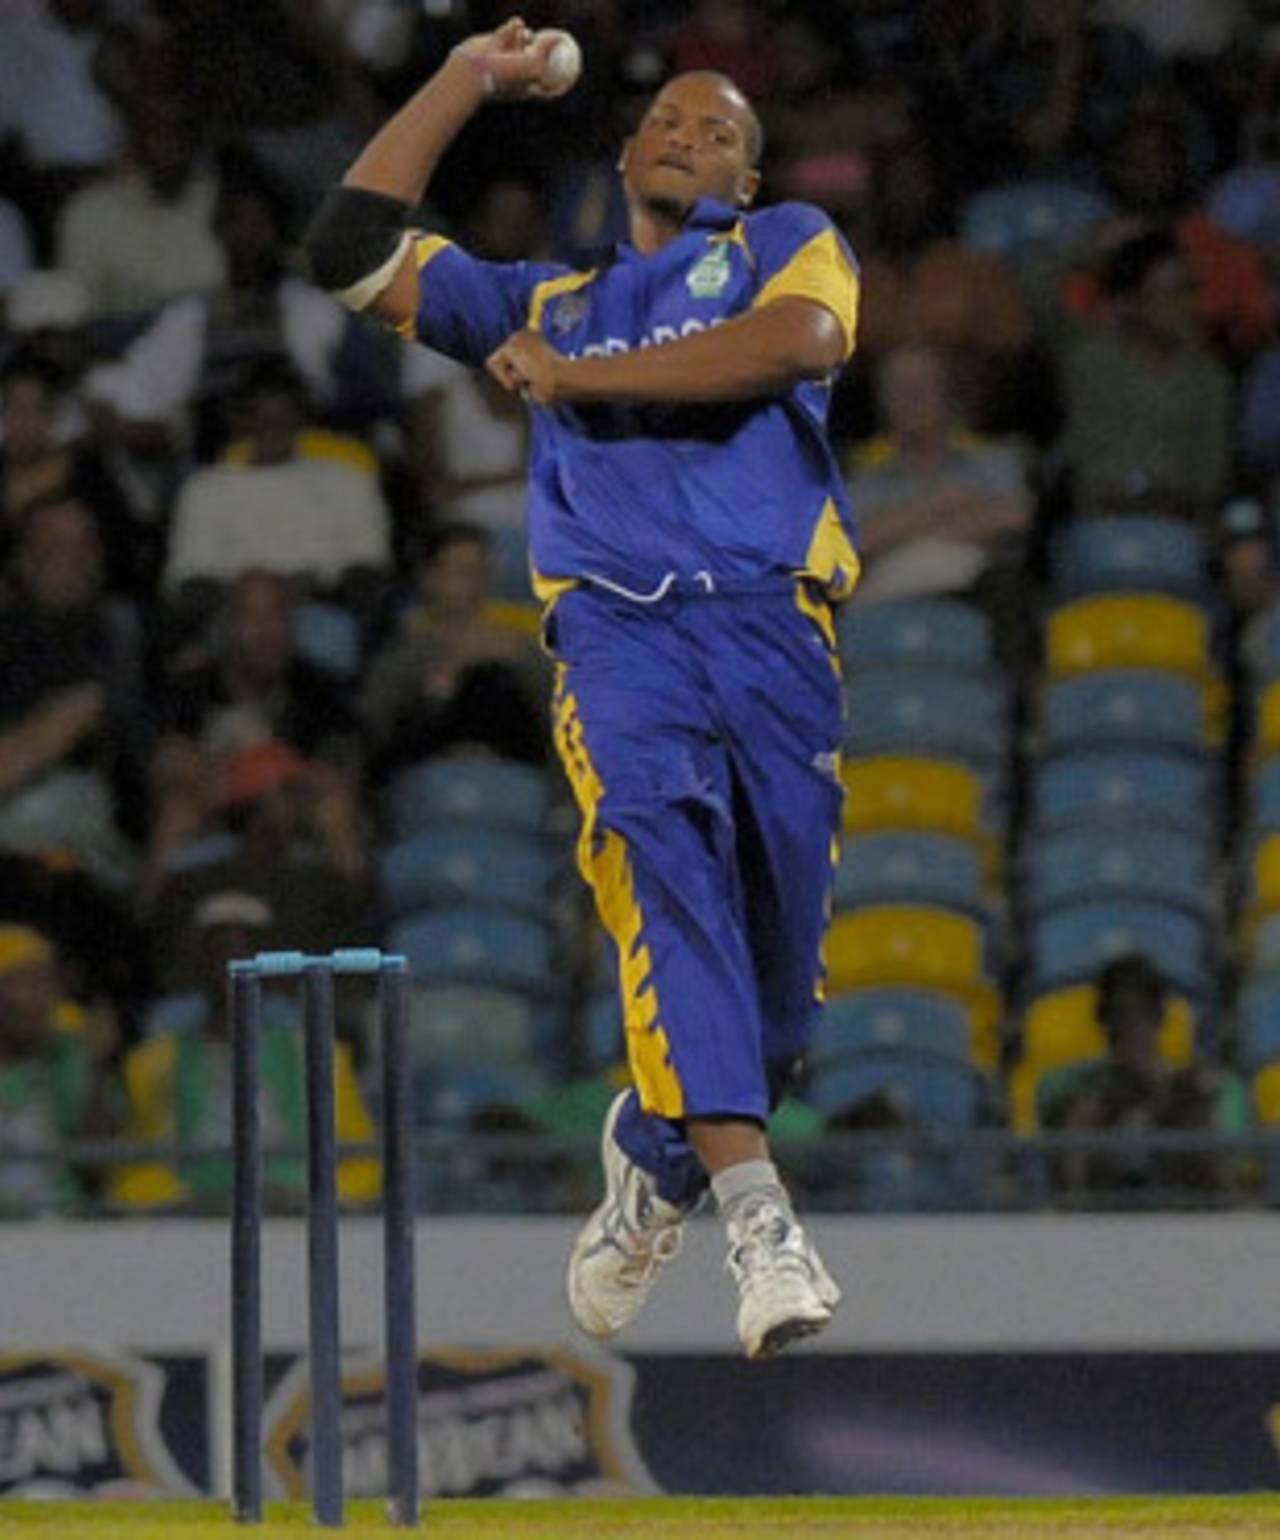 Javon Searles charges in during spell of 4 for 5, Barbados v Canada, Barbados, Caribbean T20, January 19, 2011 